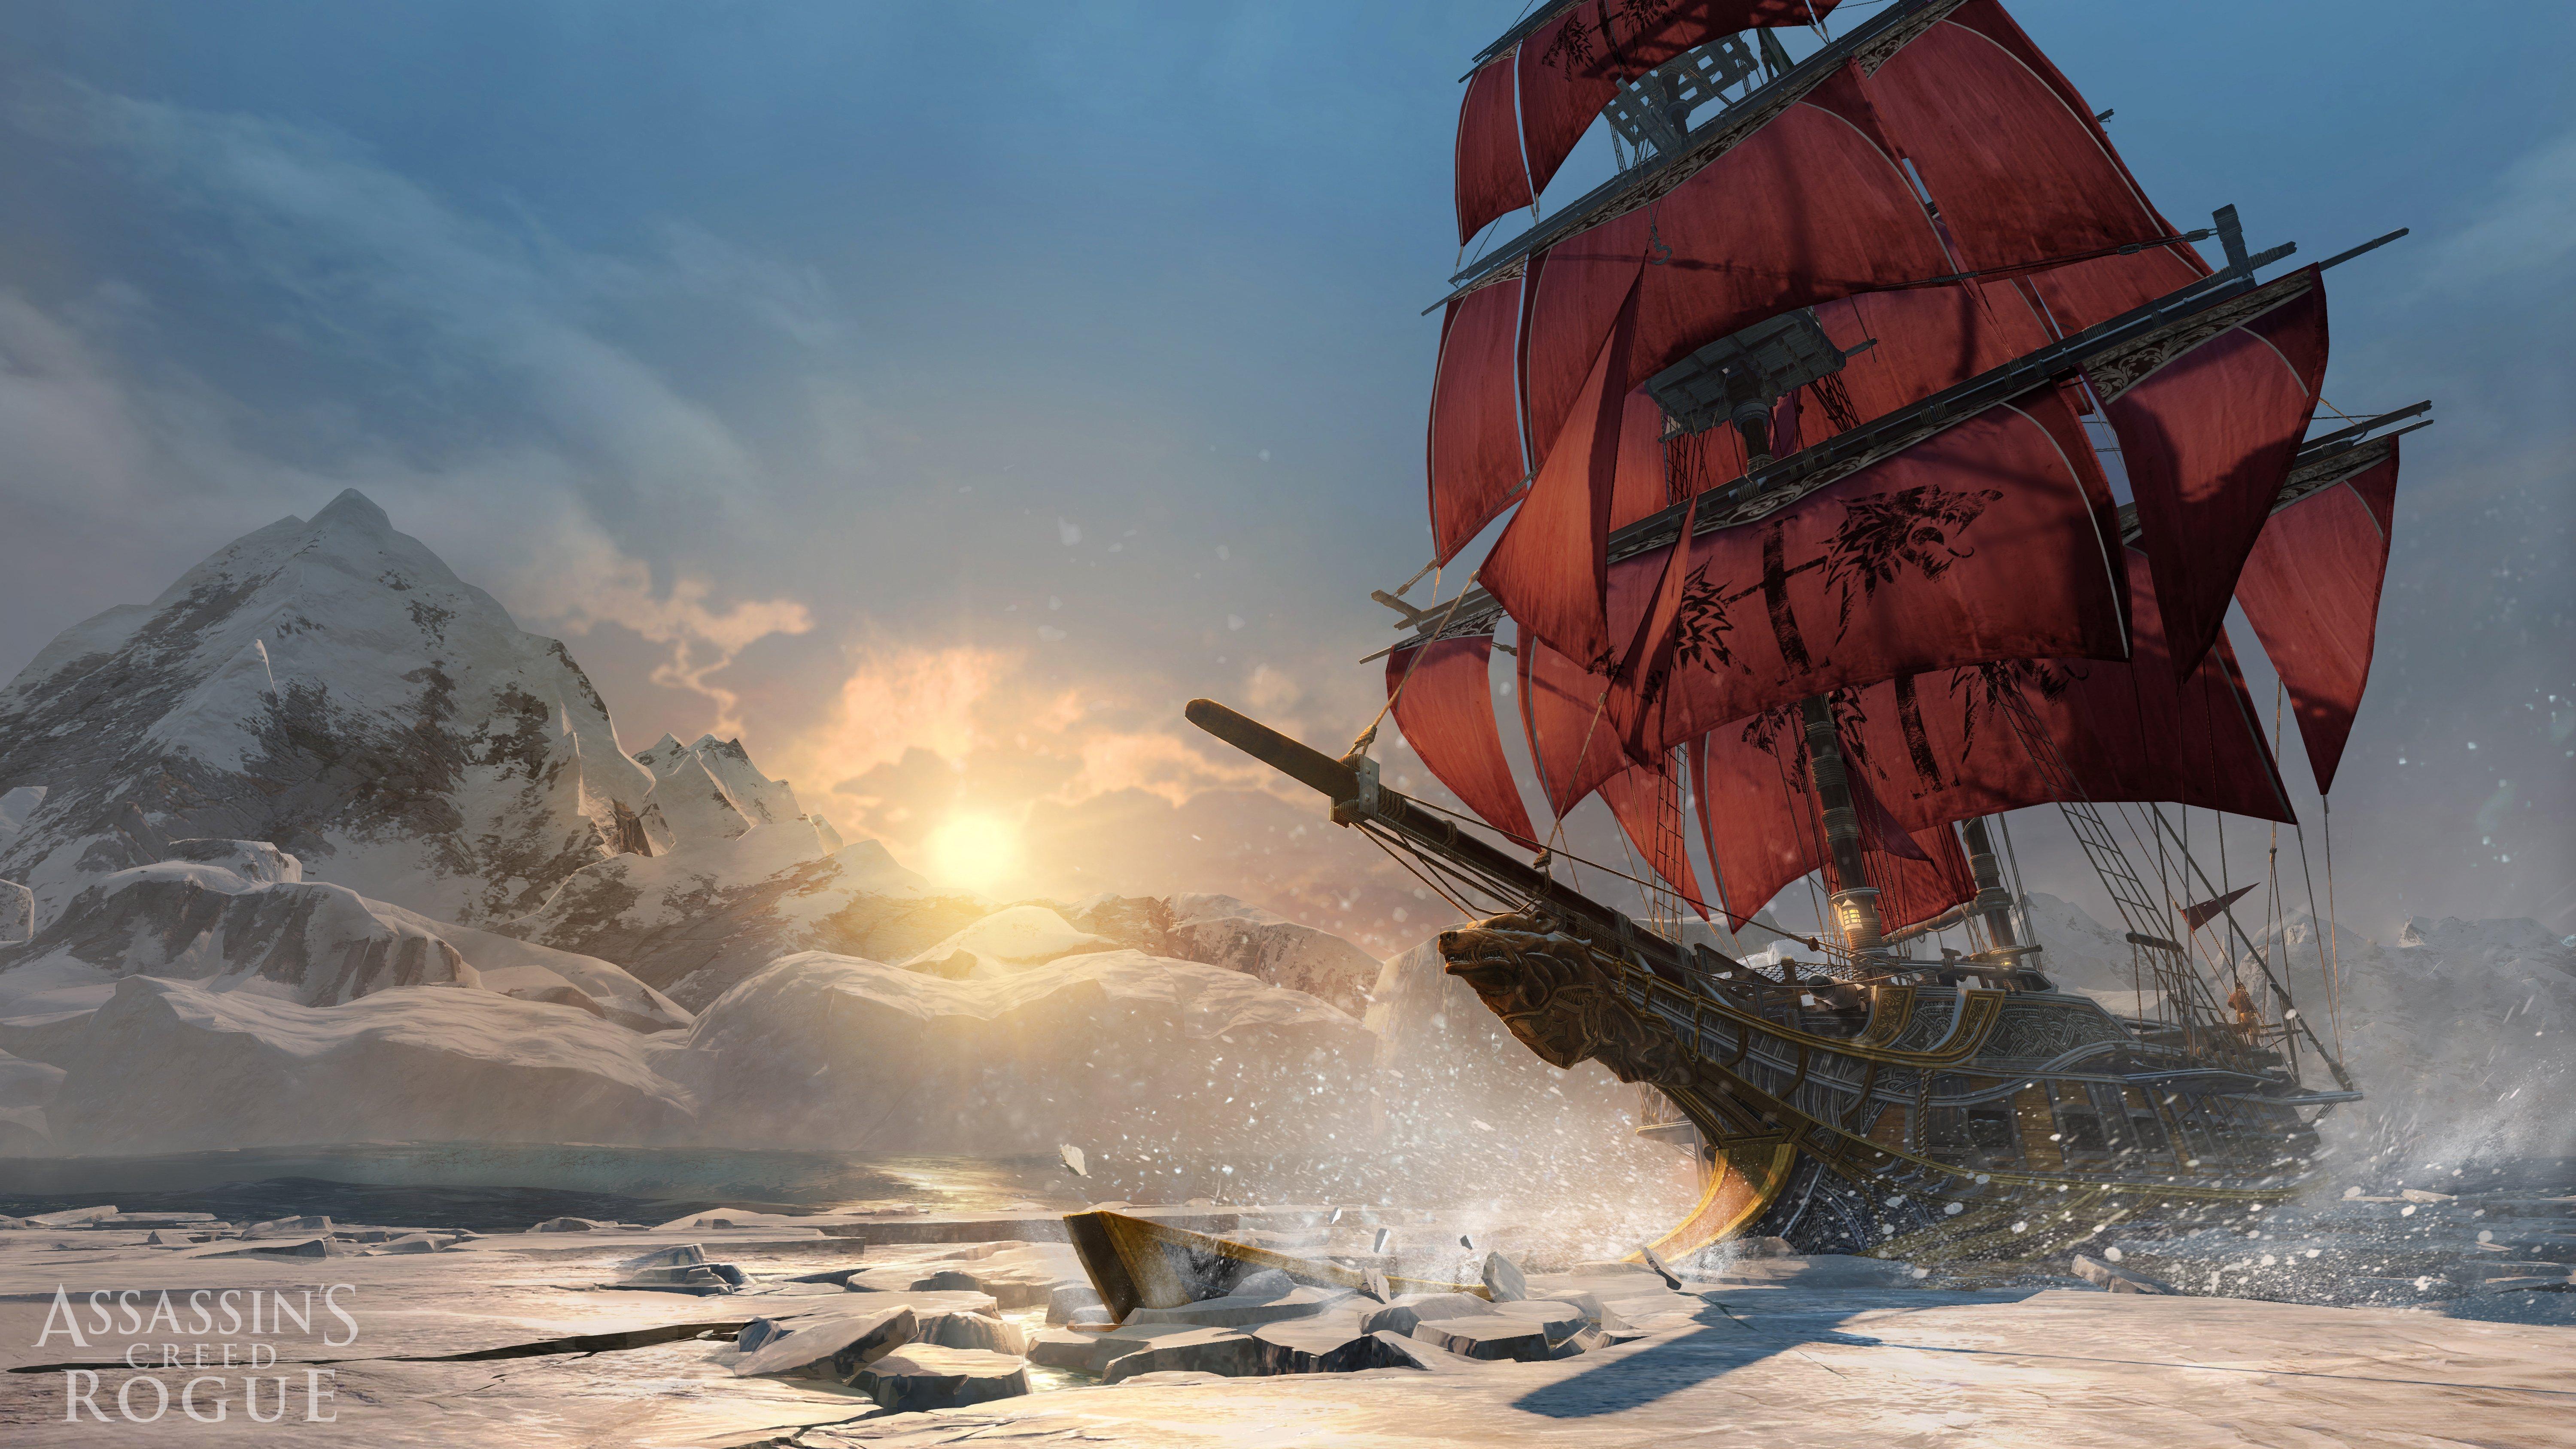 list item 6 of 6 Assassin's Creed Rogue